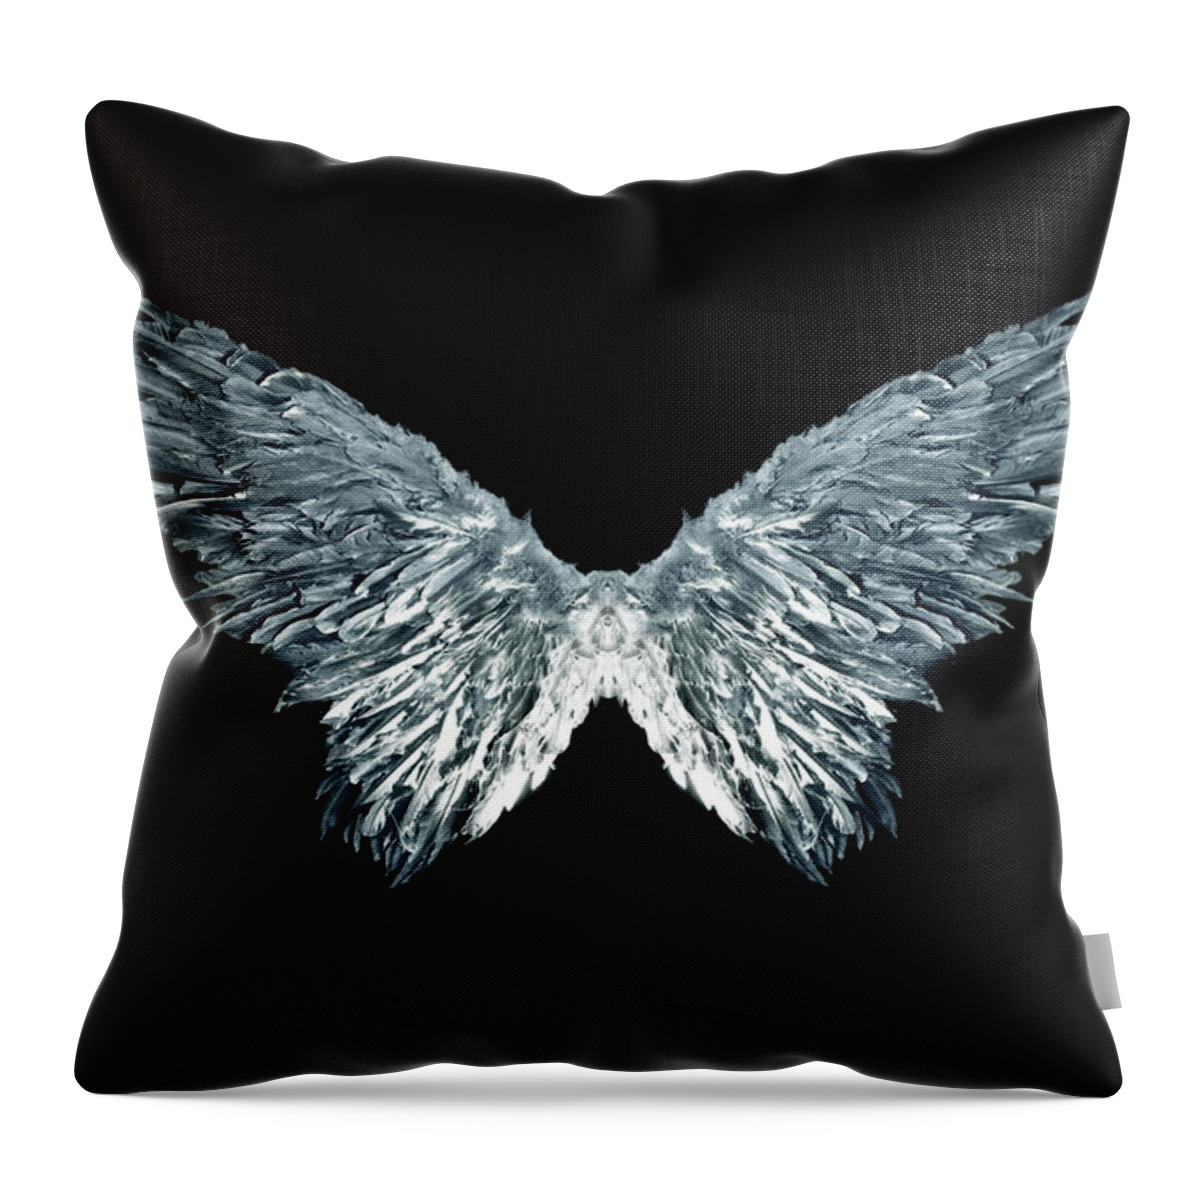 Hanging Throw Pillow featuring the photograph Silver Metallic Angel Wings On Black by Redhumv